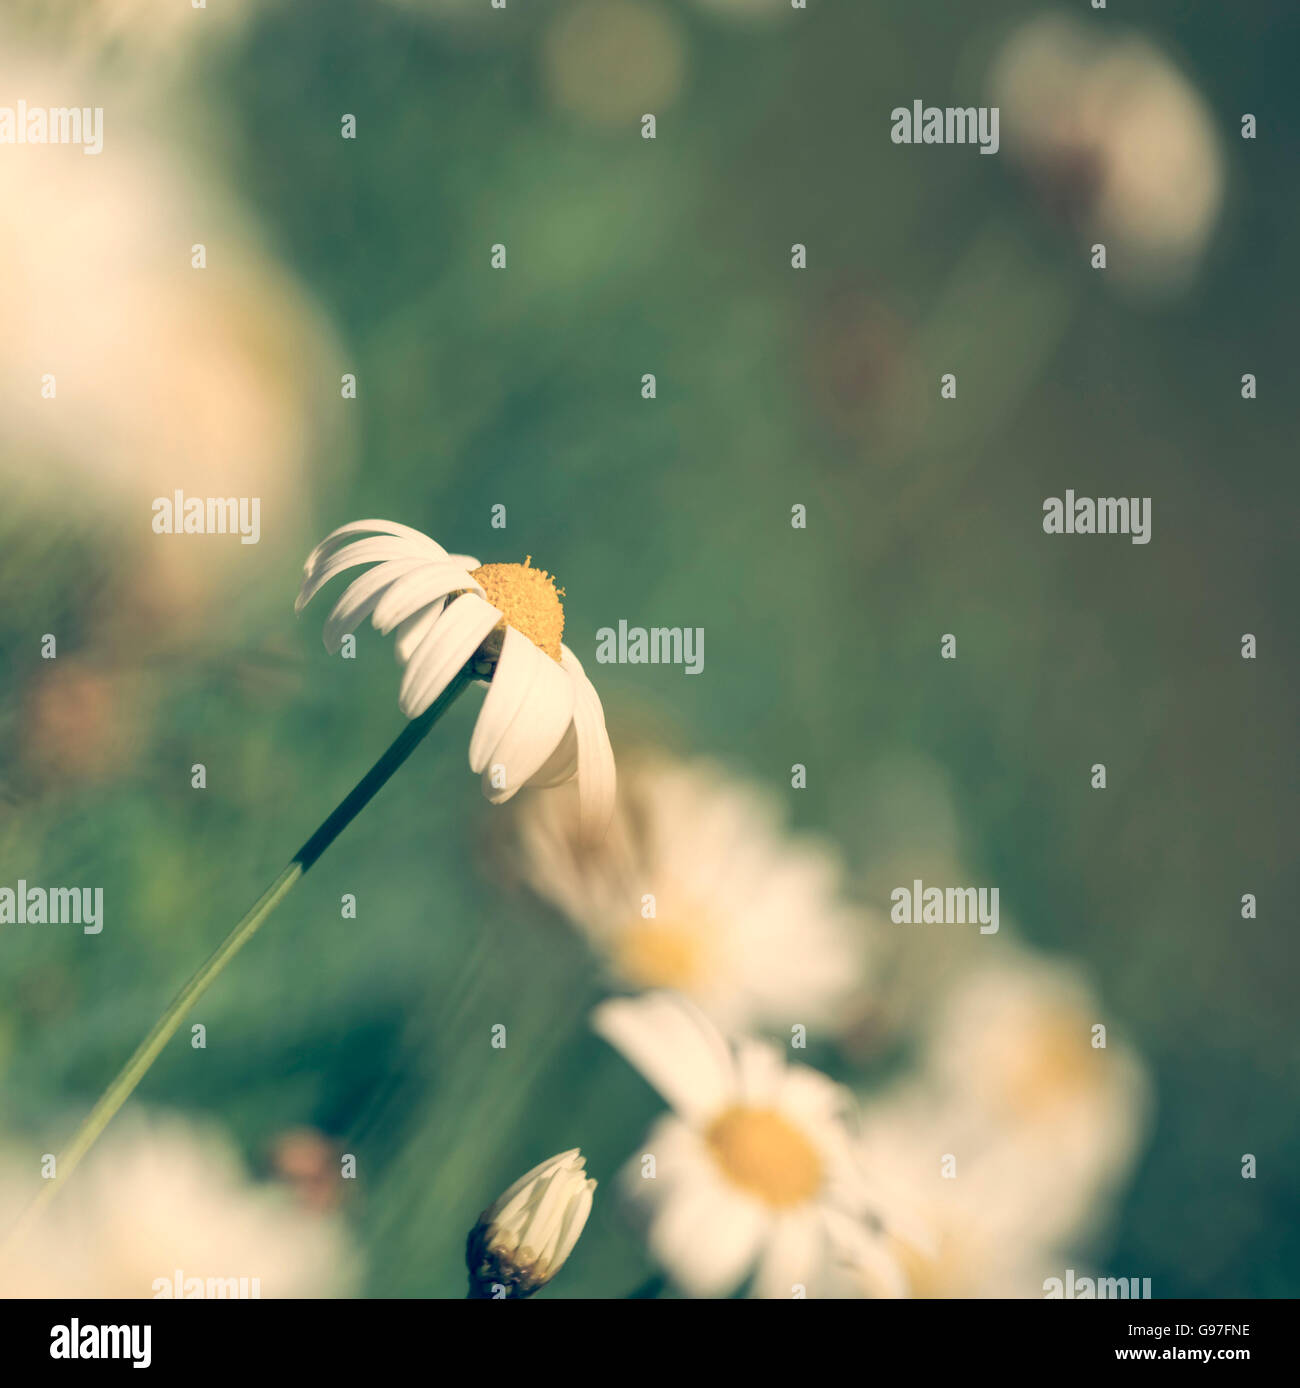 Retro style daisy flower field on summer season, white chamomile close up with blur background. Stock Photo